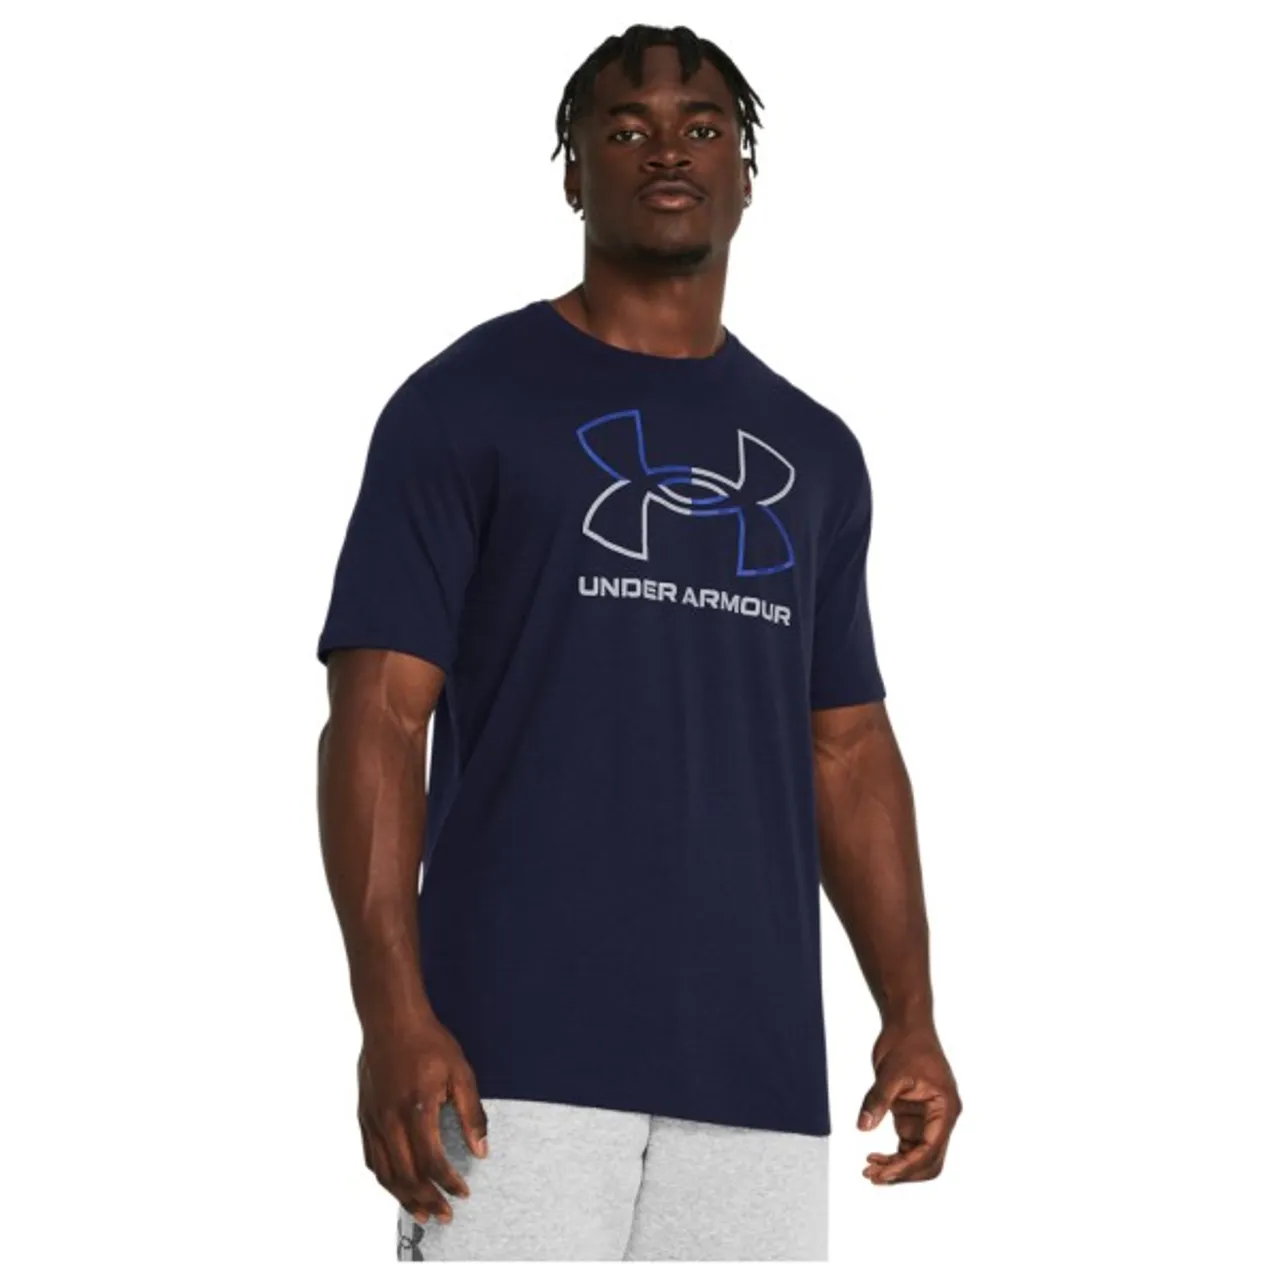 Under Armour - GL Foundation Update S/S - T-shirt